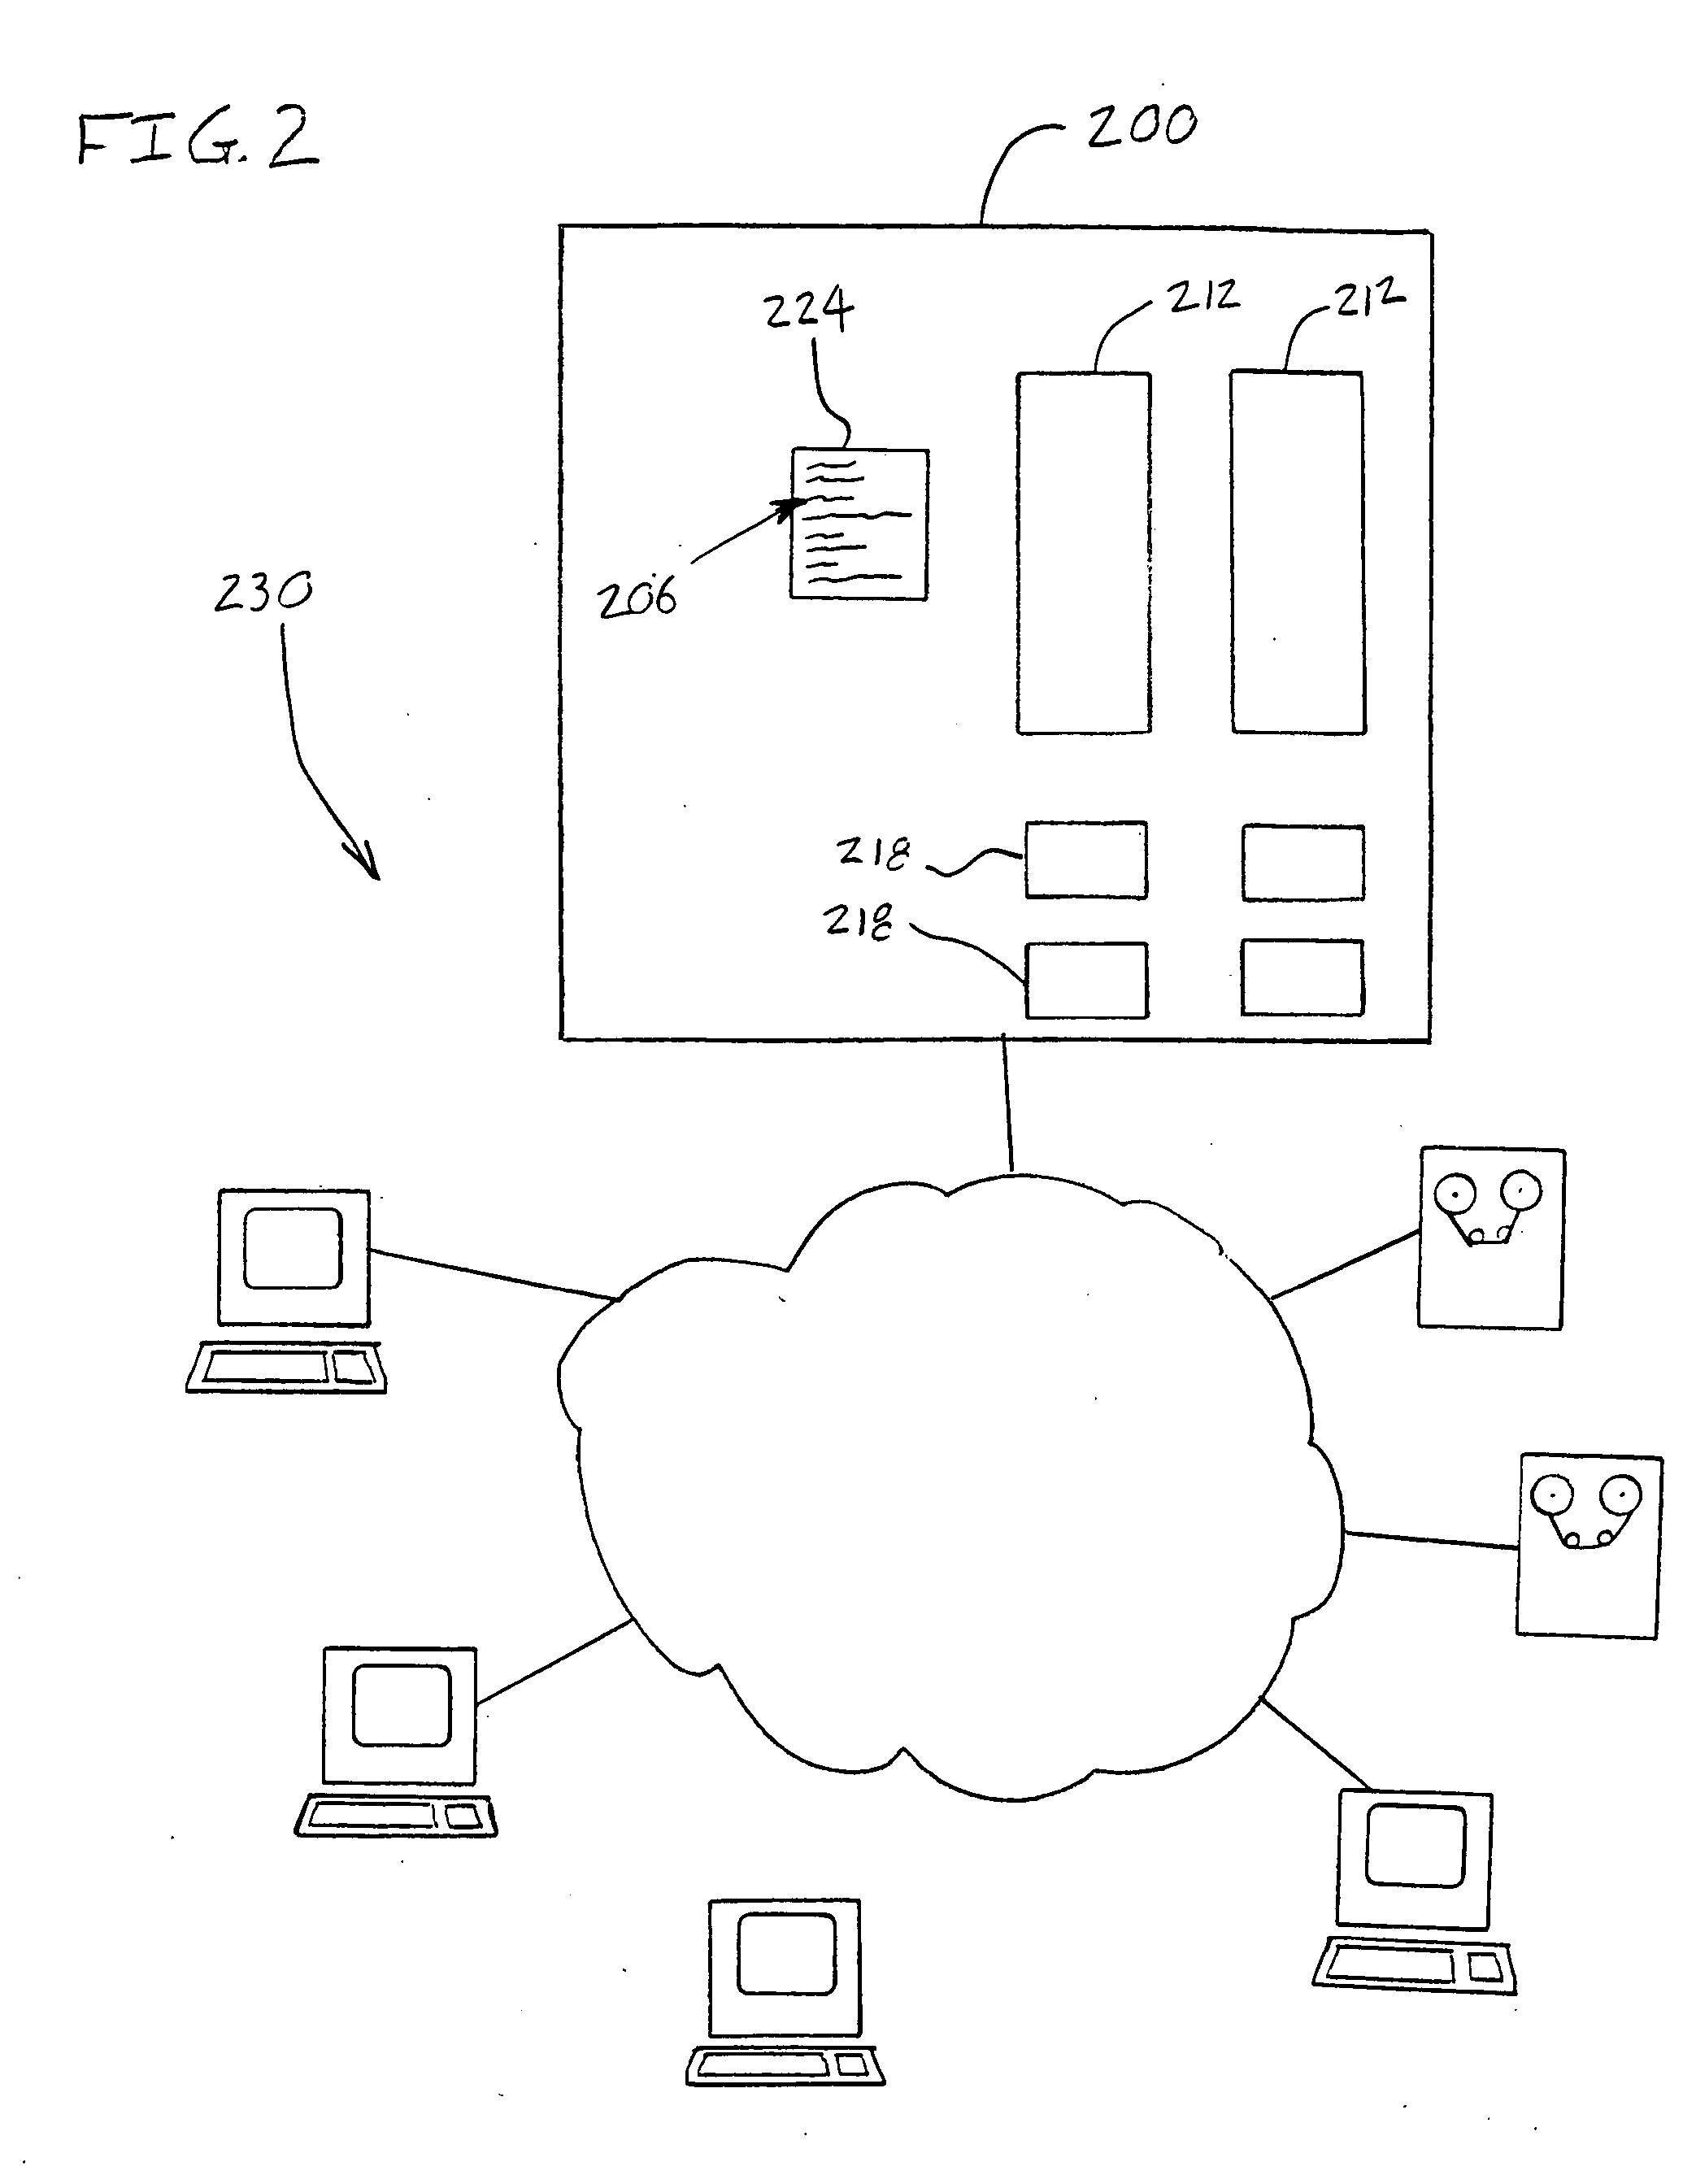 System and method for automatically categorizing objects using an empirically based goodness of fit technique